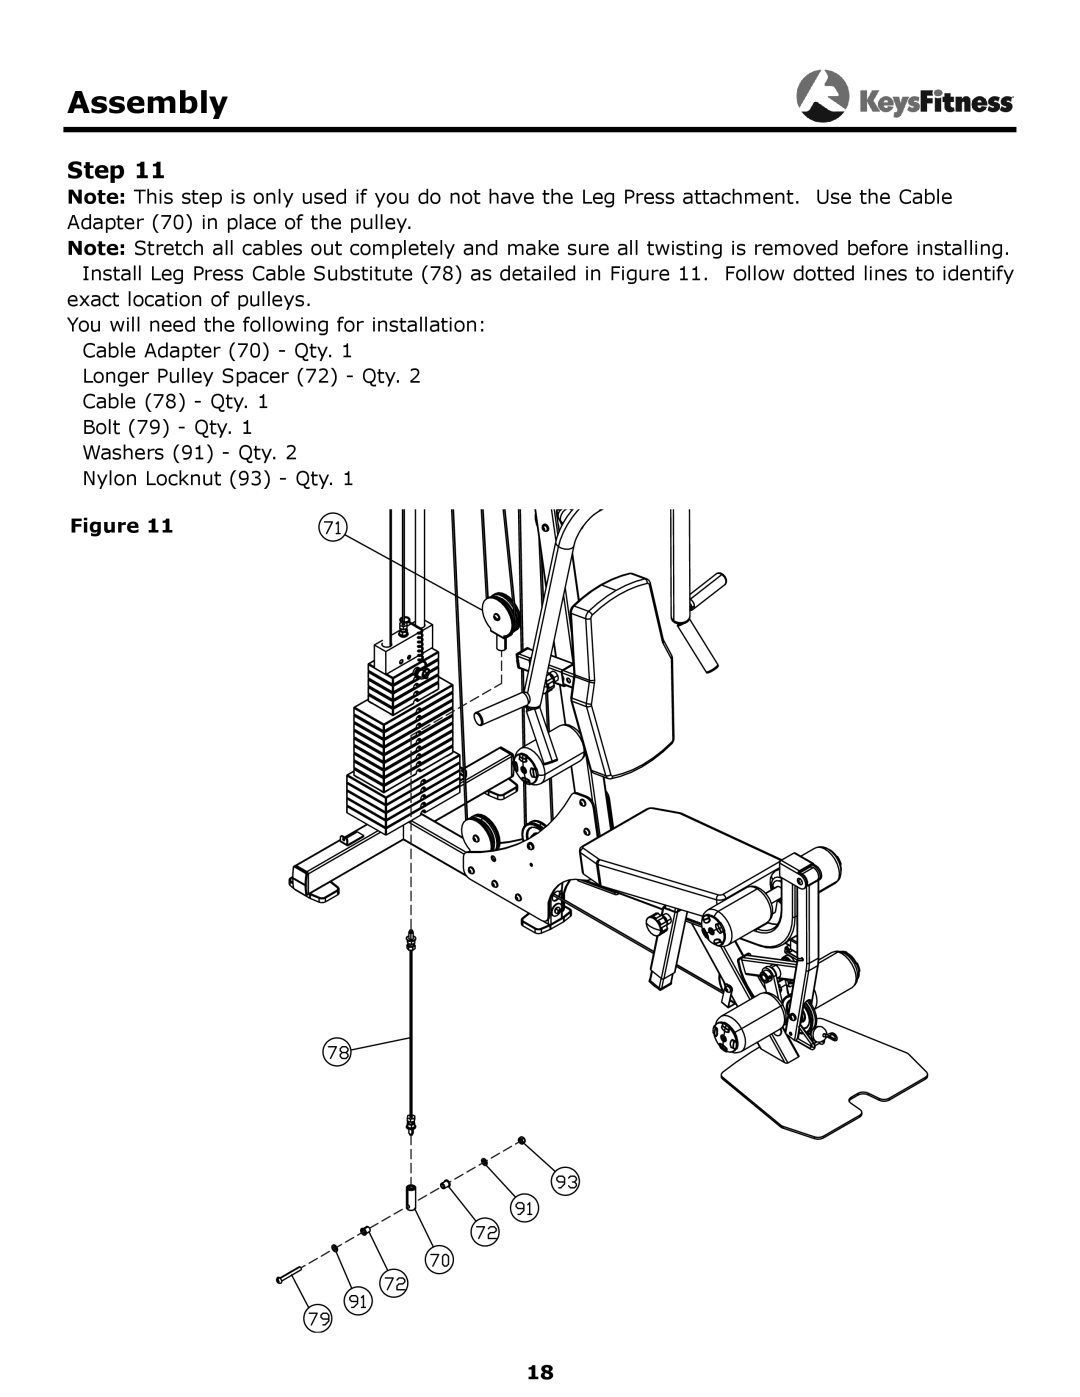 Keys Fitness KF-1560 owner manual Assembly, Step, exact location of pulleys 